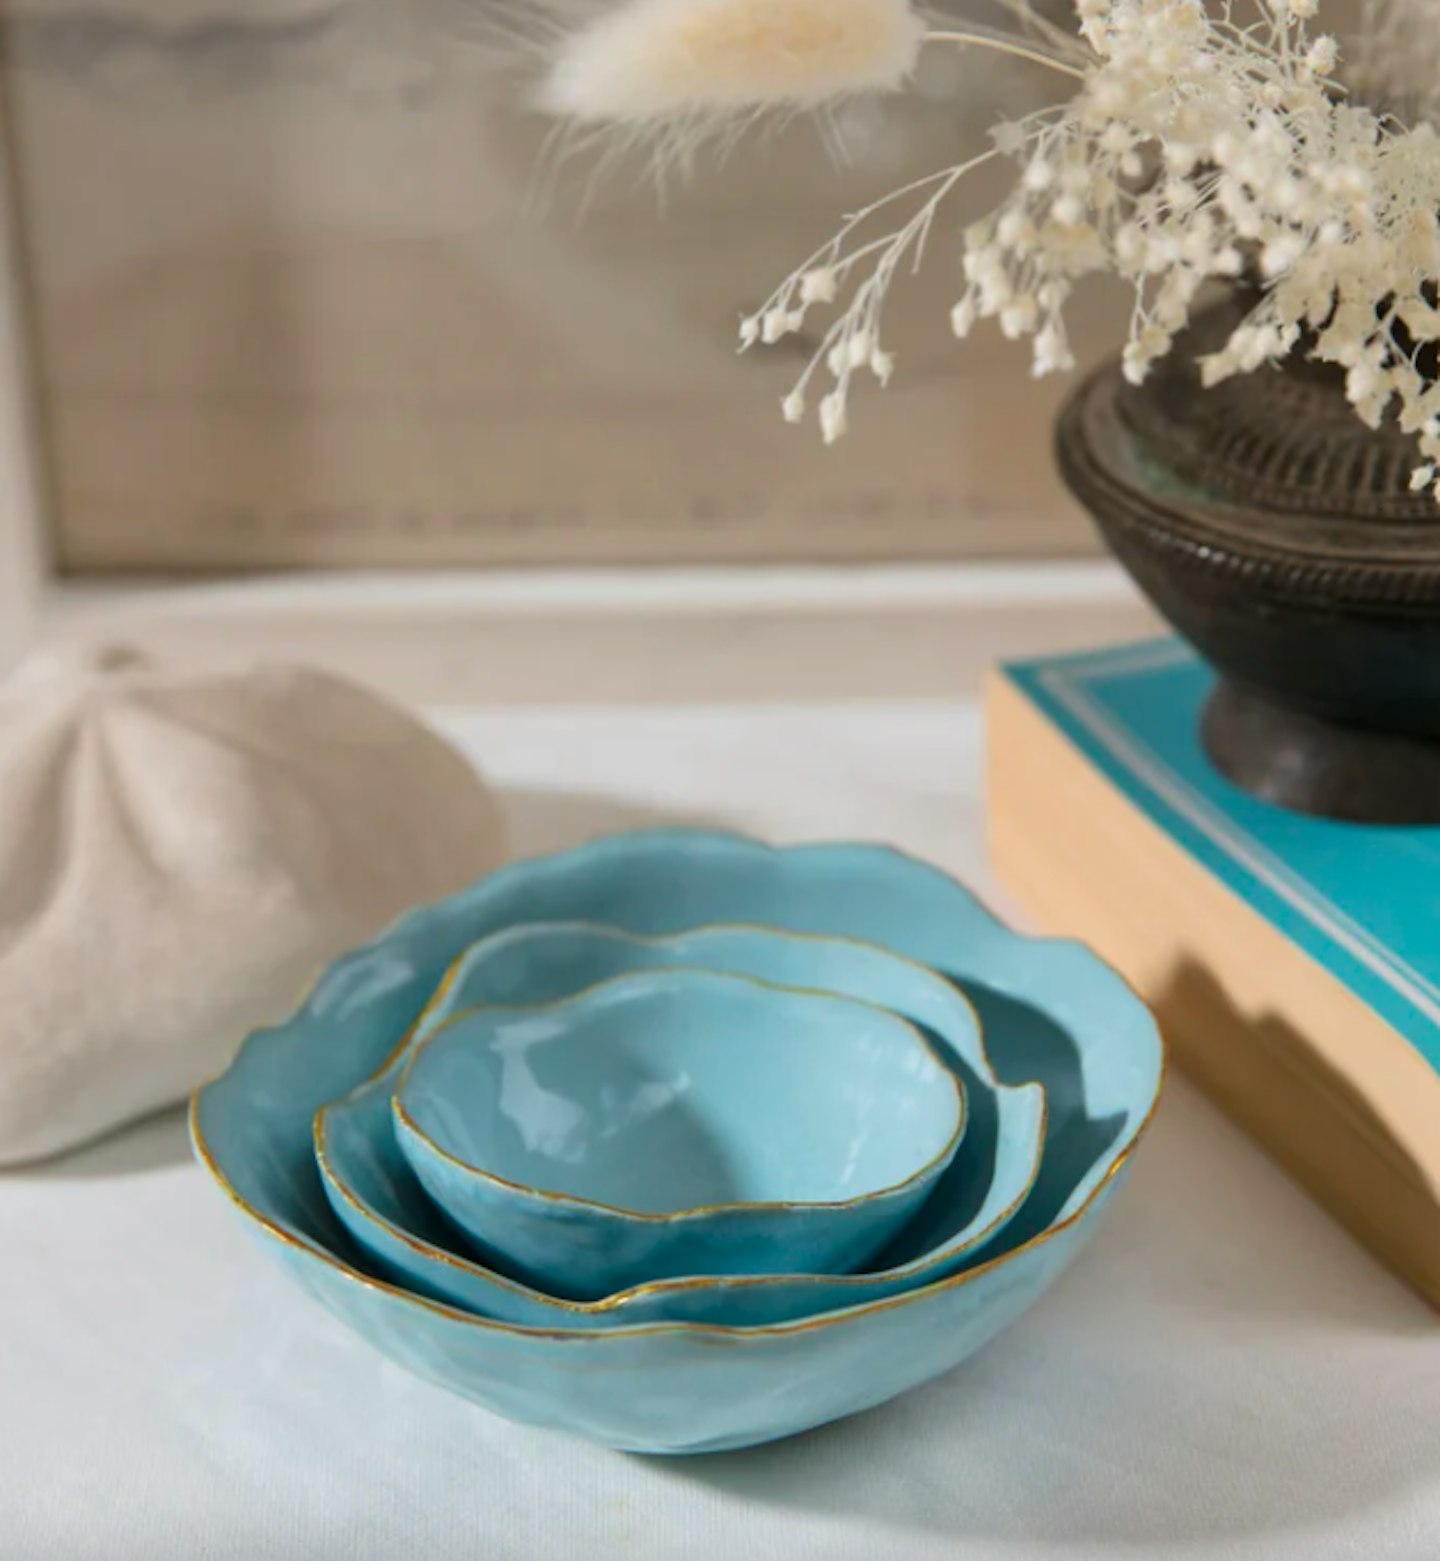 Tuesday – Monica Vinader, Nesting Dishes, £75